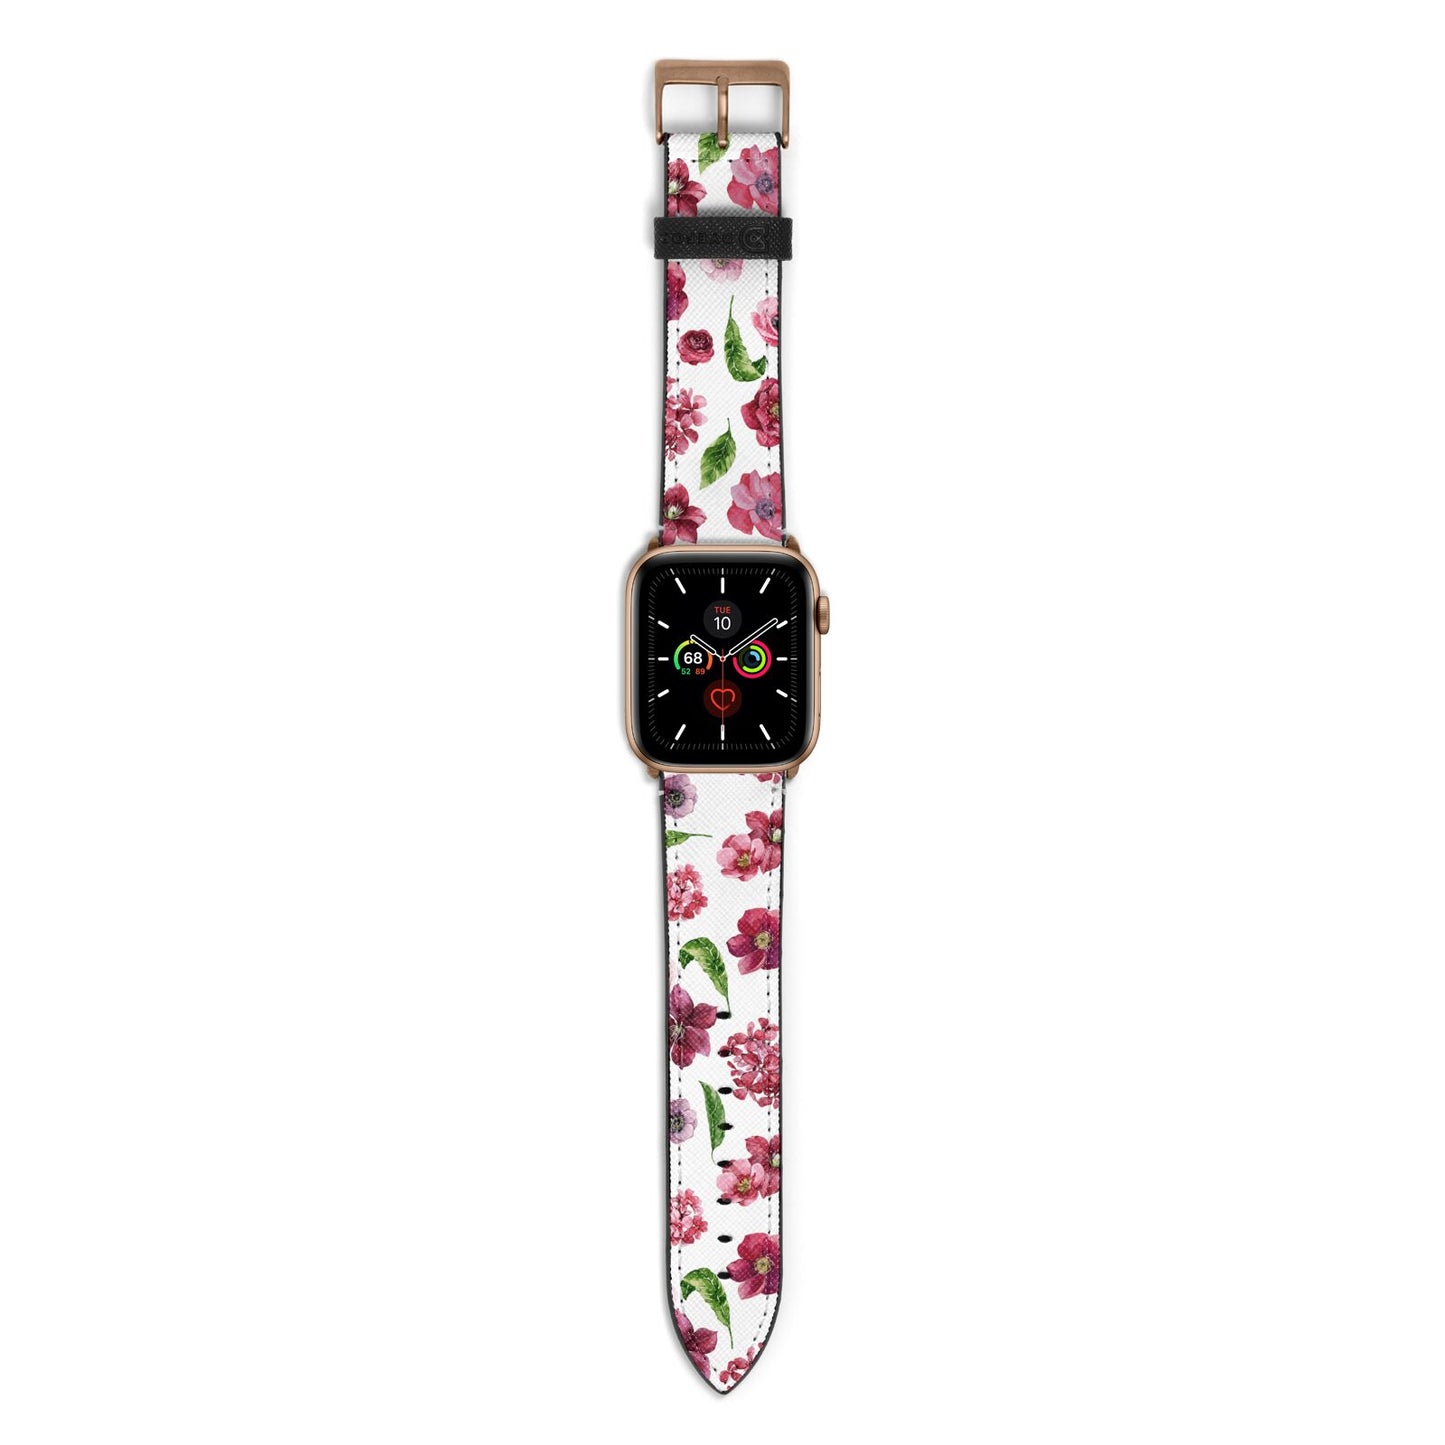 Pink Floral Apple Watch Strap with Gold Hardware